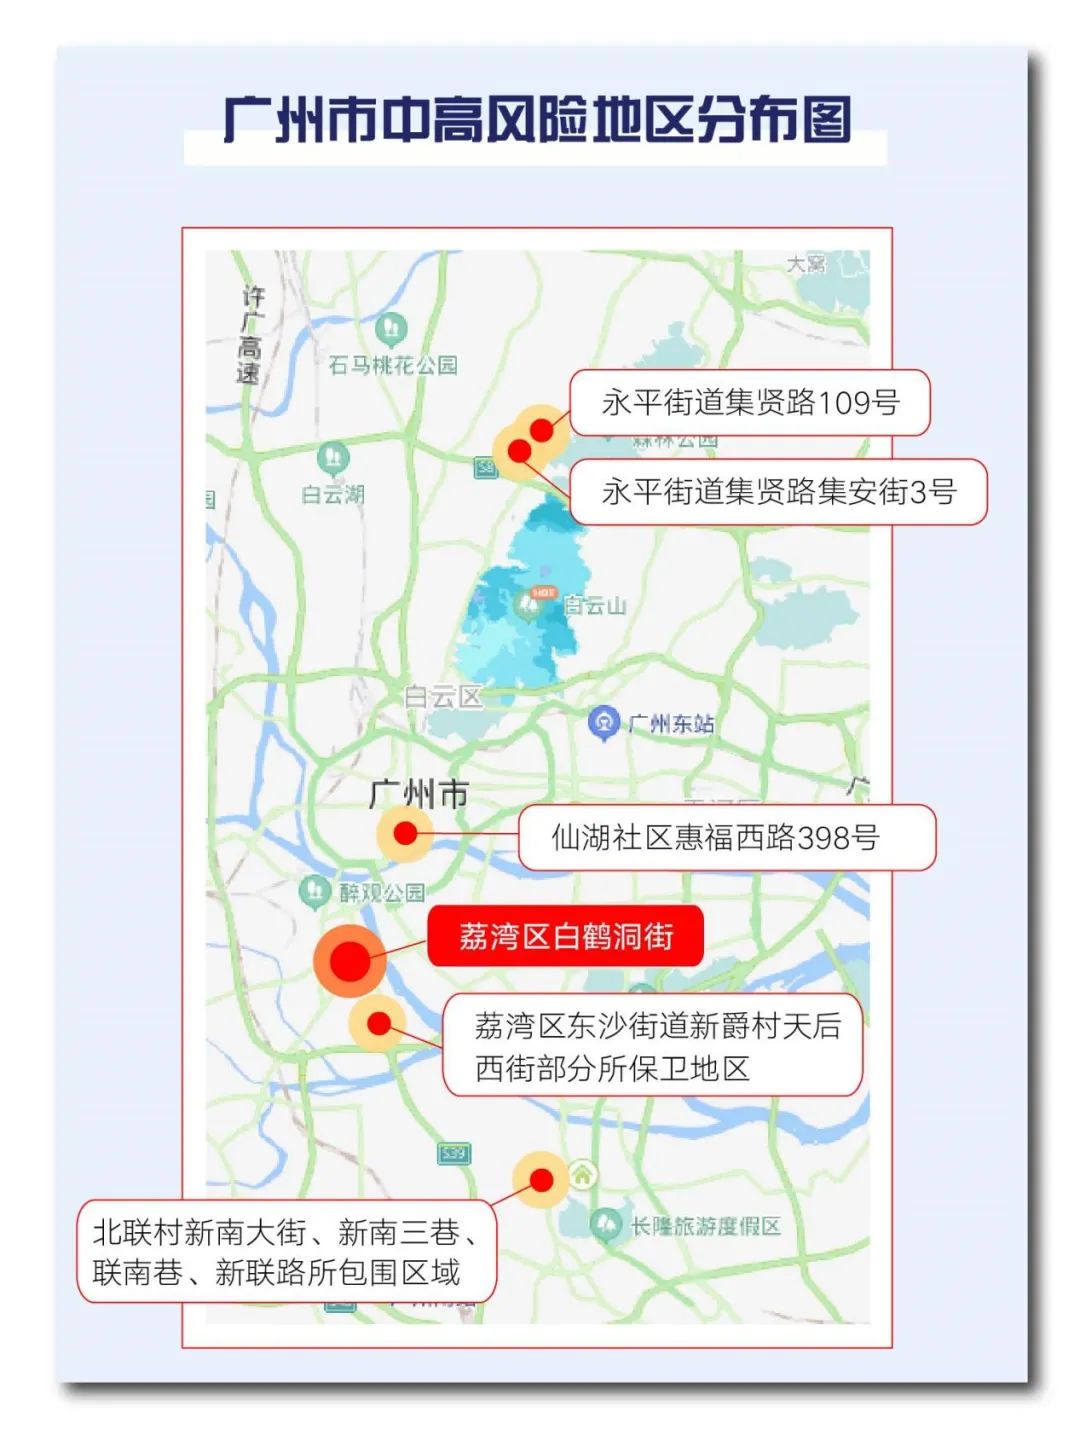   (As of June 19, the distribution map of medium and high risk areas in Guangzhou. Liang Shuyi/Picture)